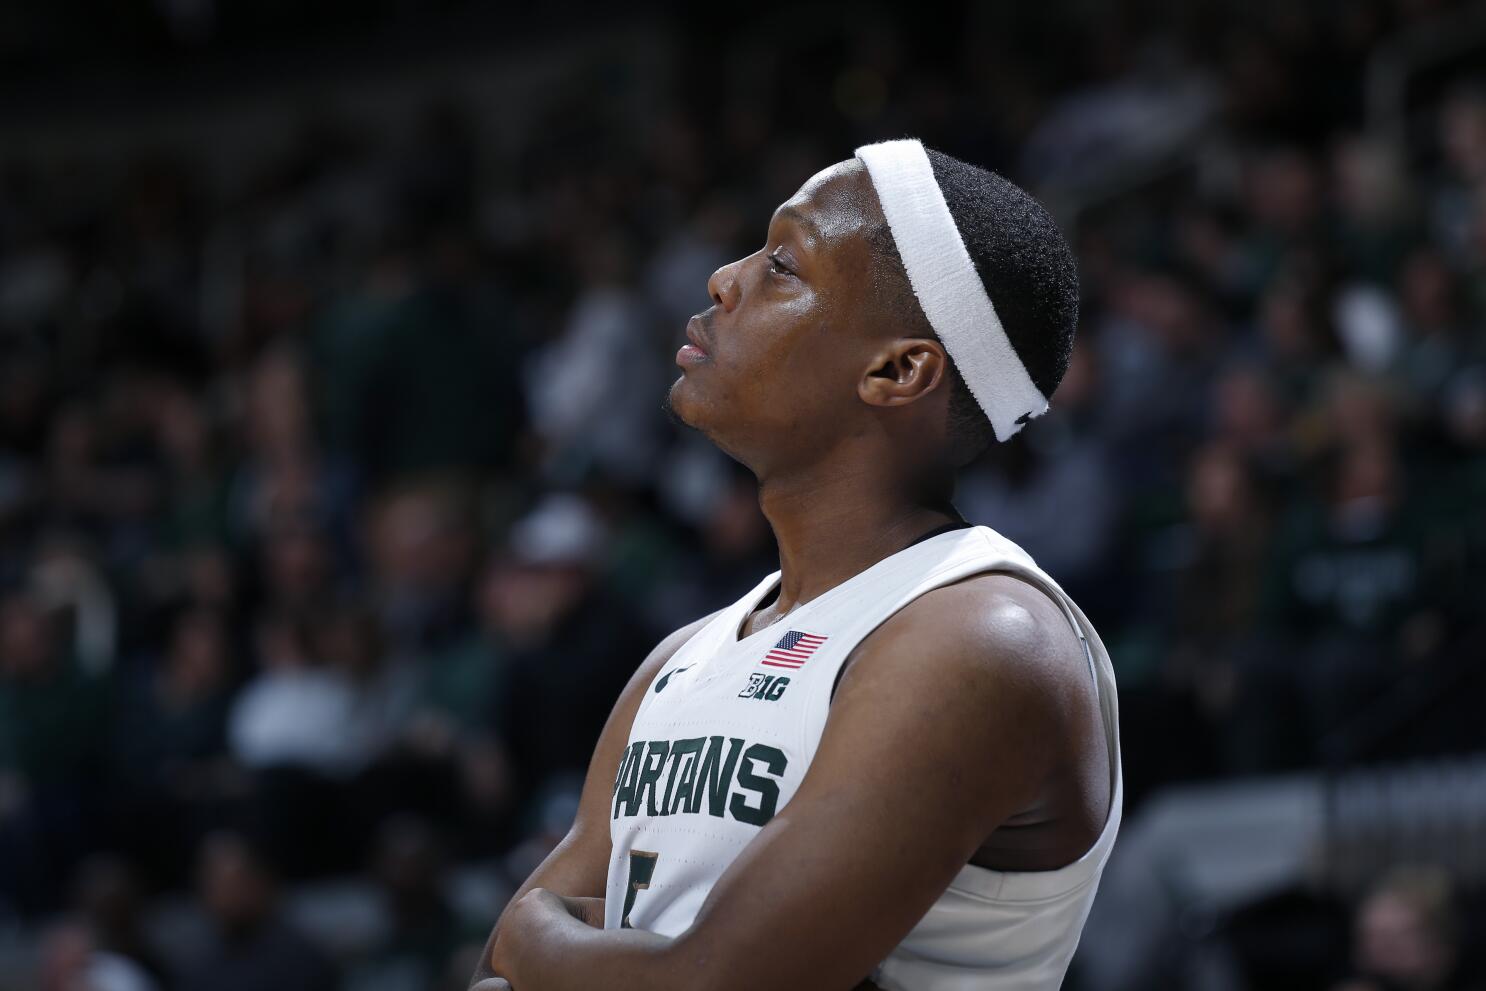 Brother of Michigan State's Cassius Winston struck and killed by train